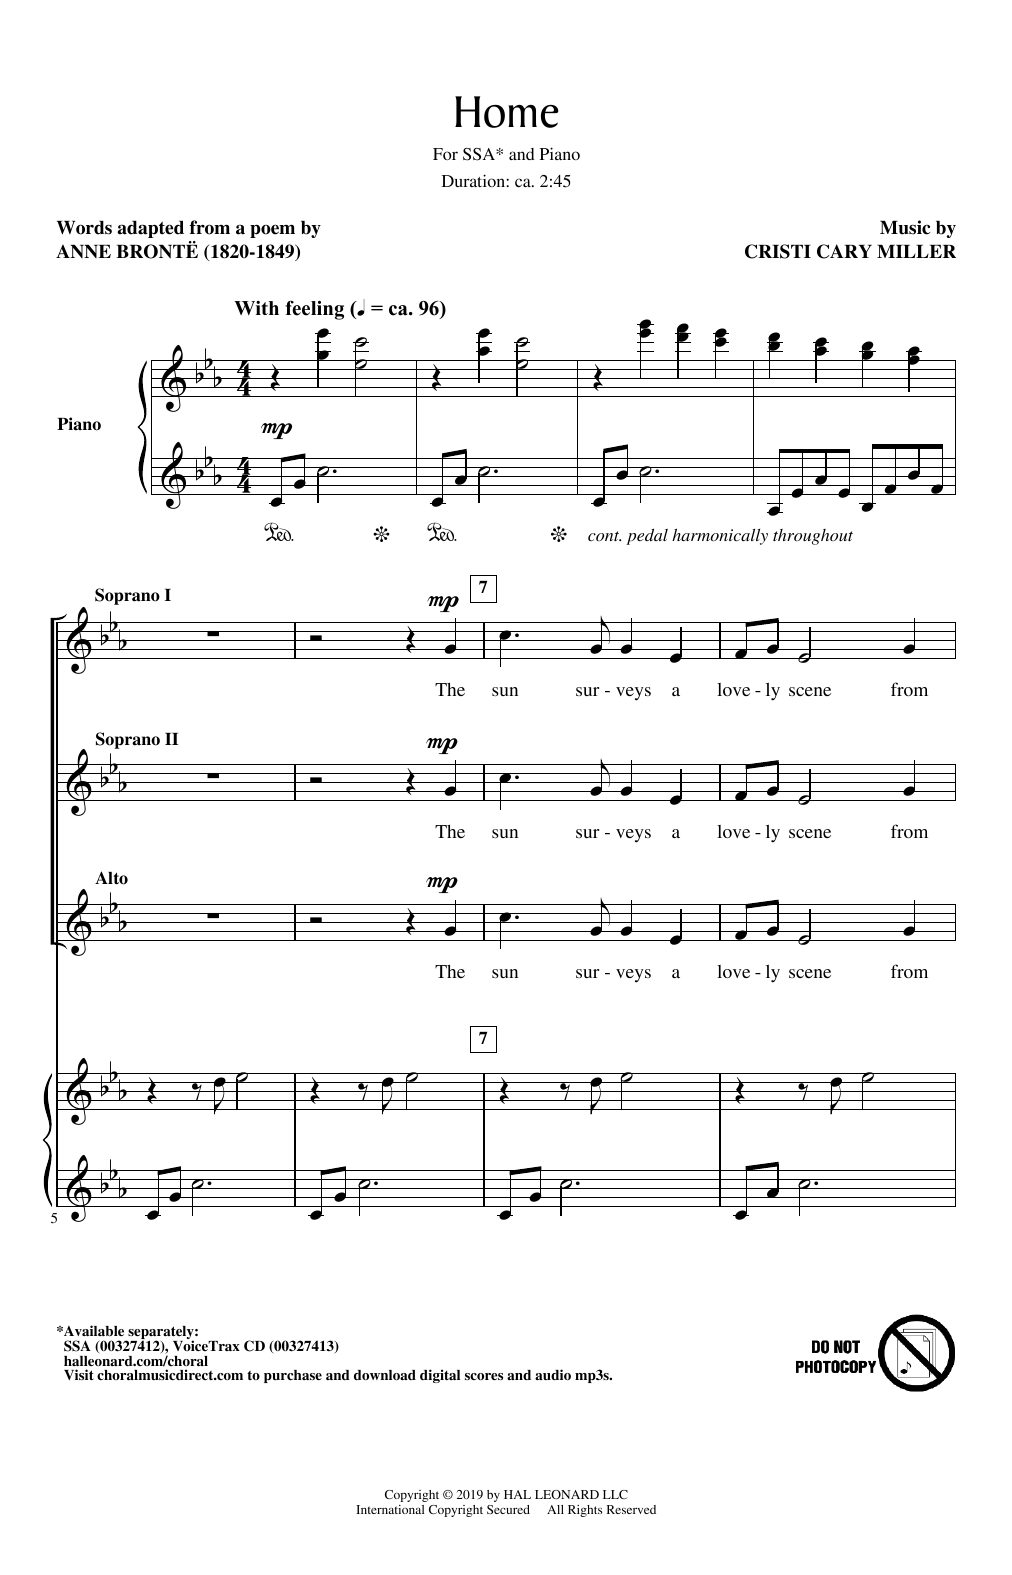 Download Cristi Cary Miller Home Sheet Music